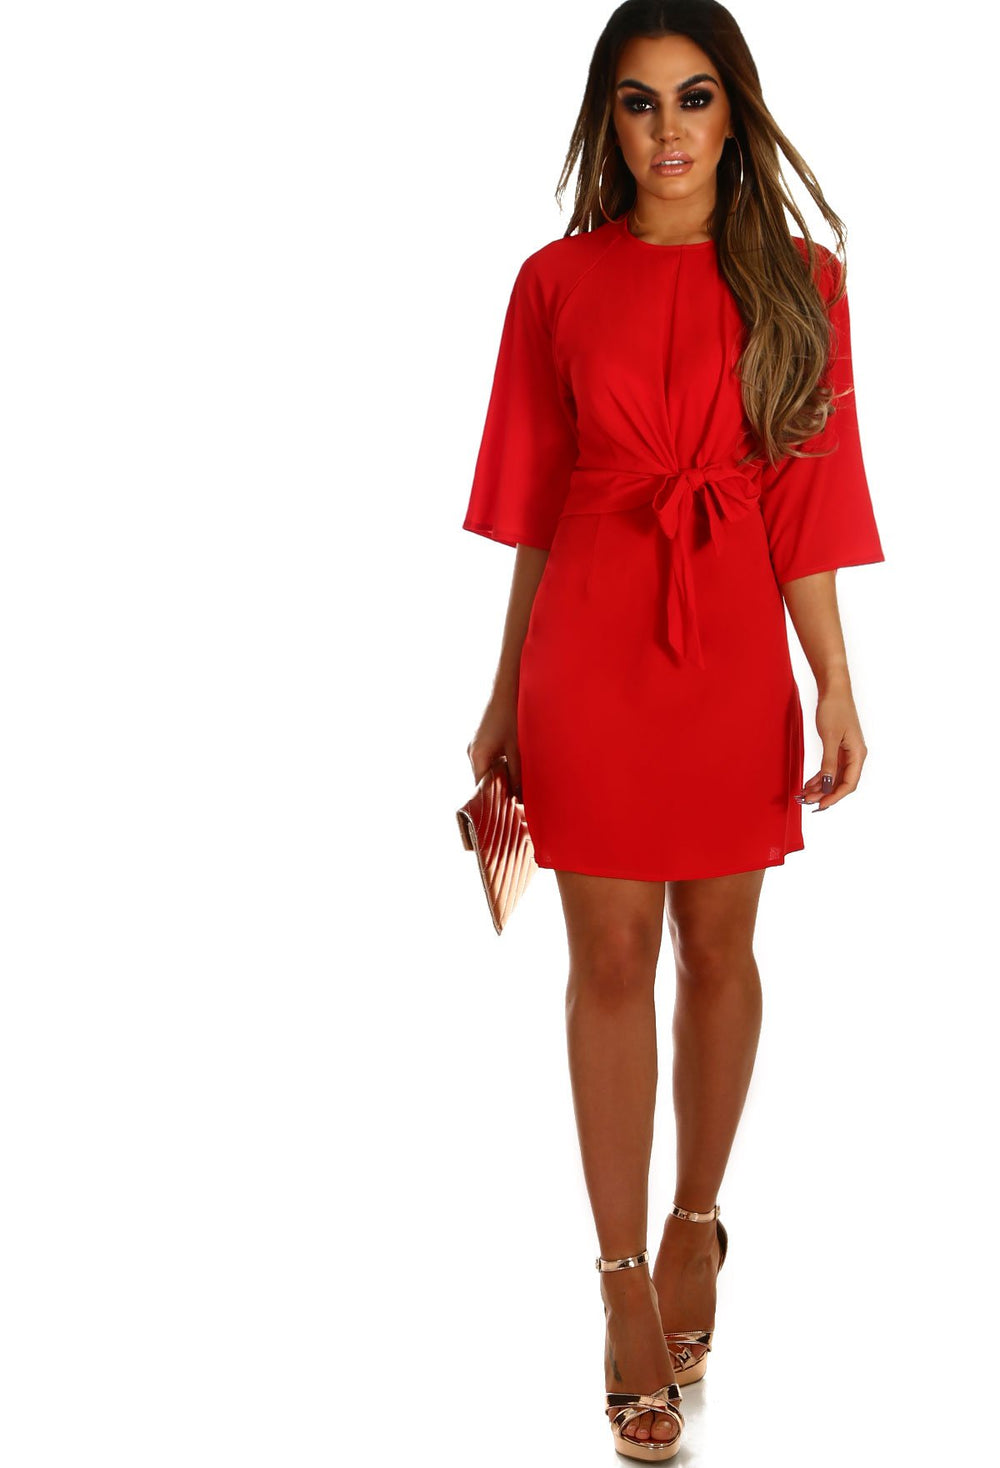 Simply Sexy Red Tie Waist Mini Dress – Pink Boutique UK